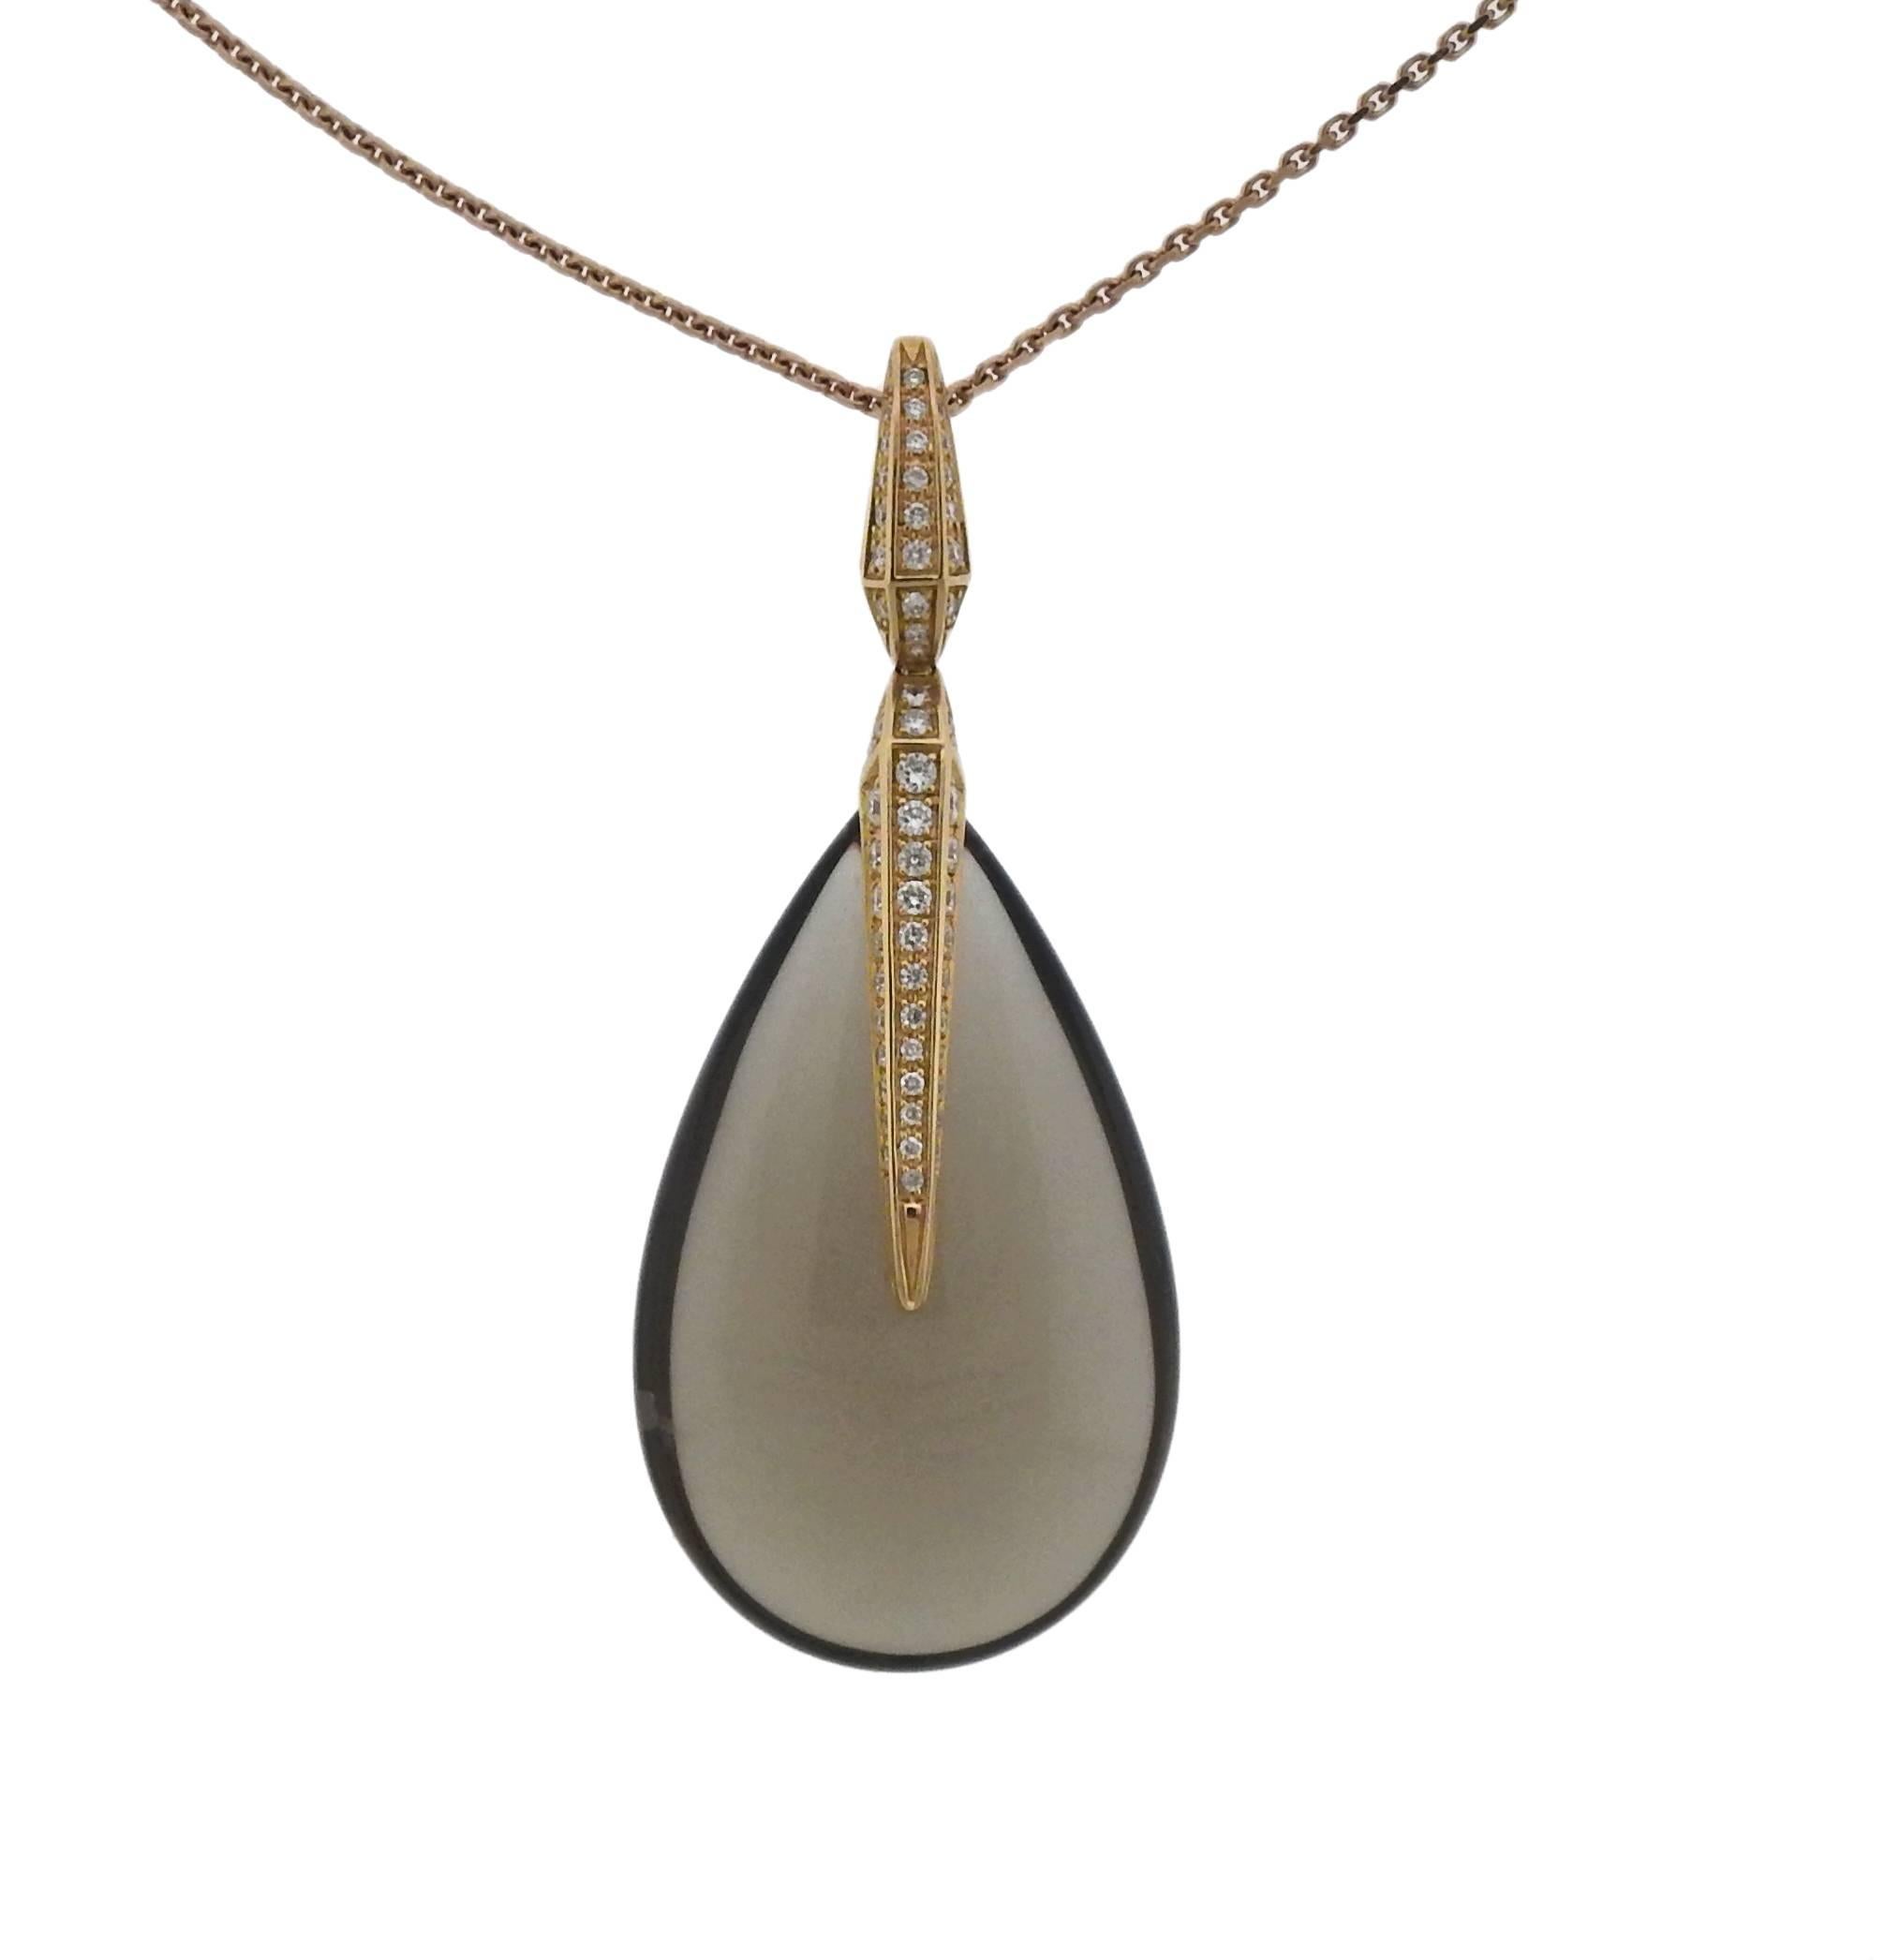 18k gold chain with drop pendant, crafted by Chimento, featuring 36mm x 22mm x 10.2mm smokey quartz, adorned with approx. 0.46ctw in G/VS diamonds. Retail $4220. Necklace is 19.5